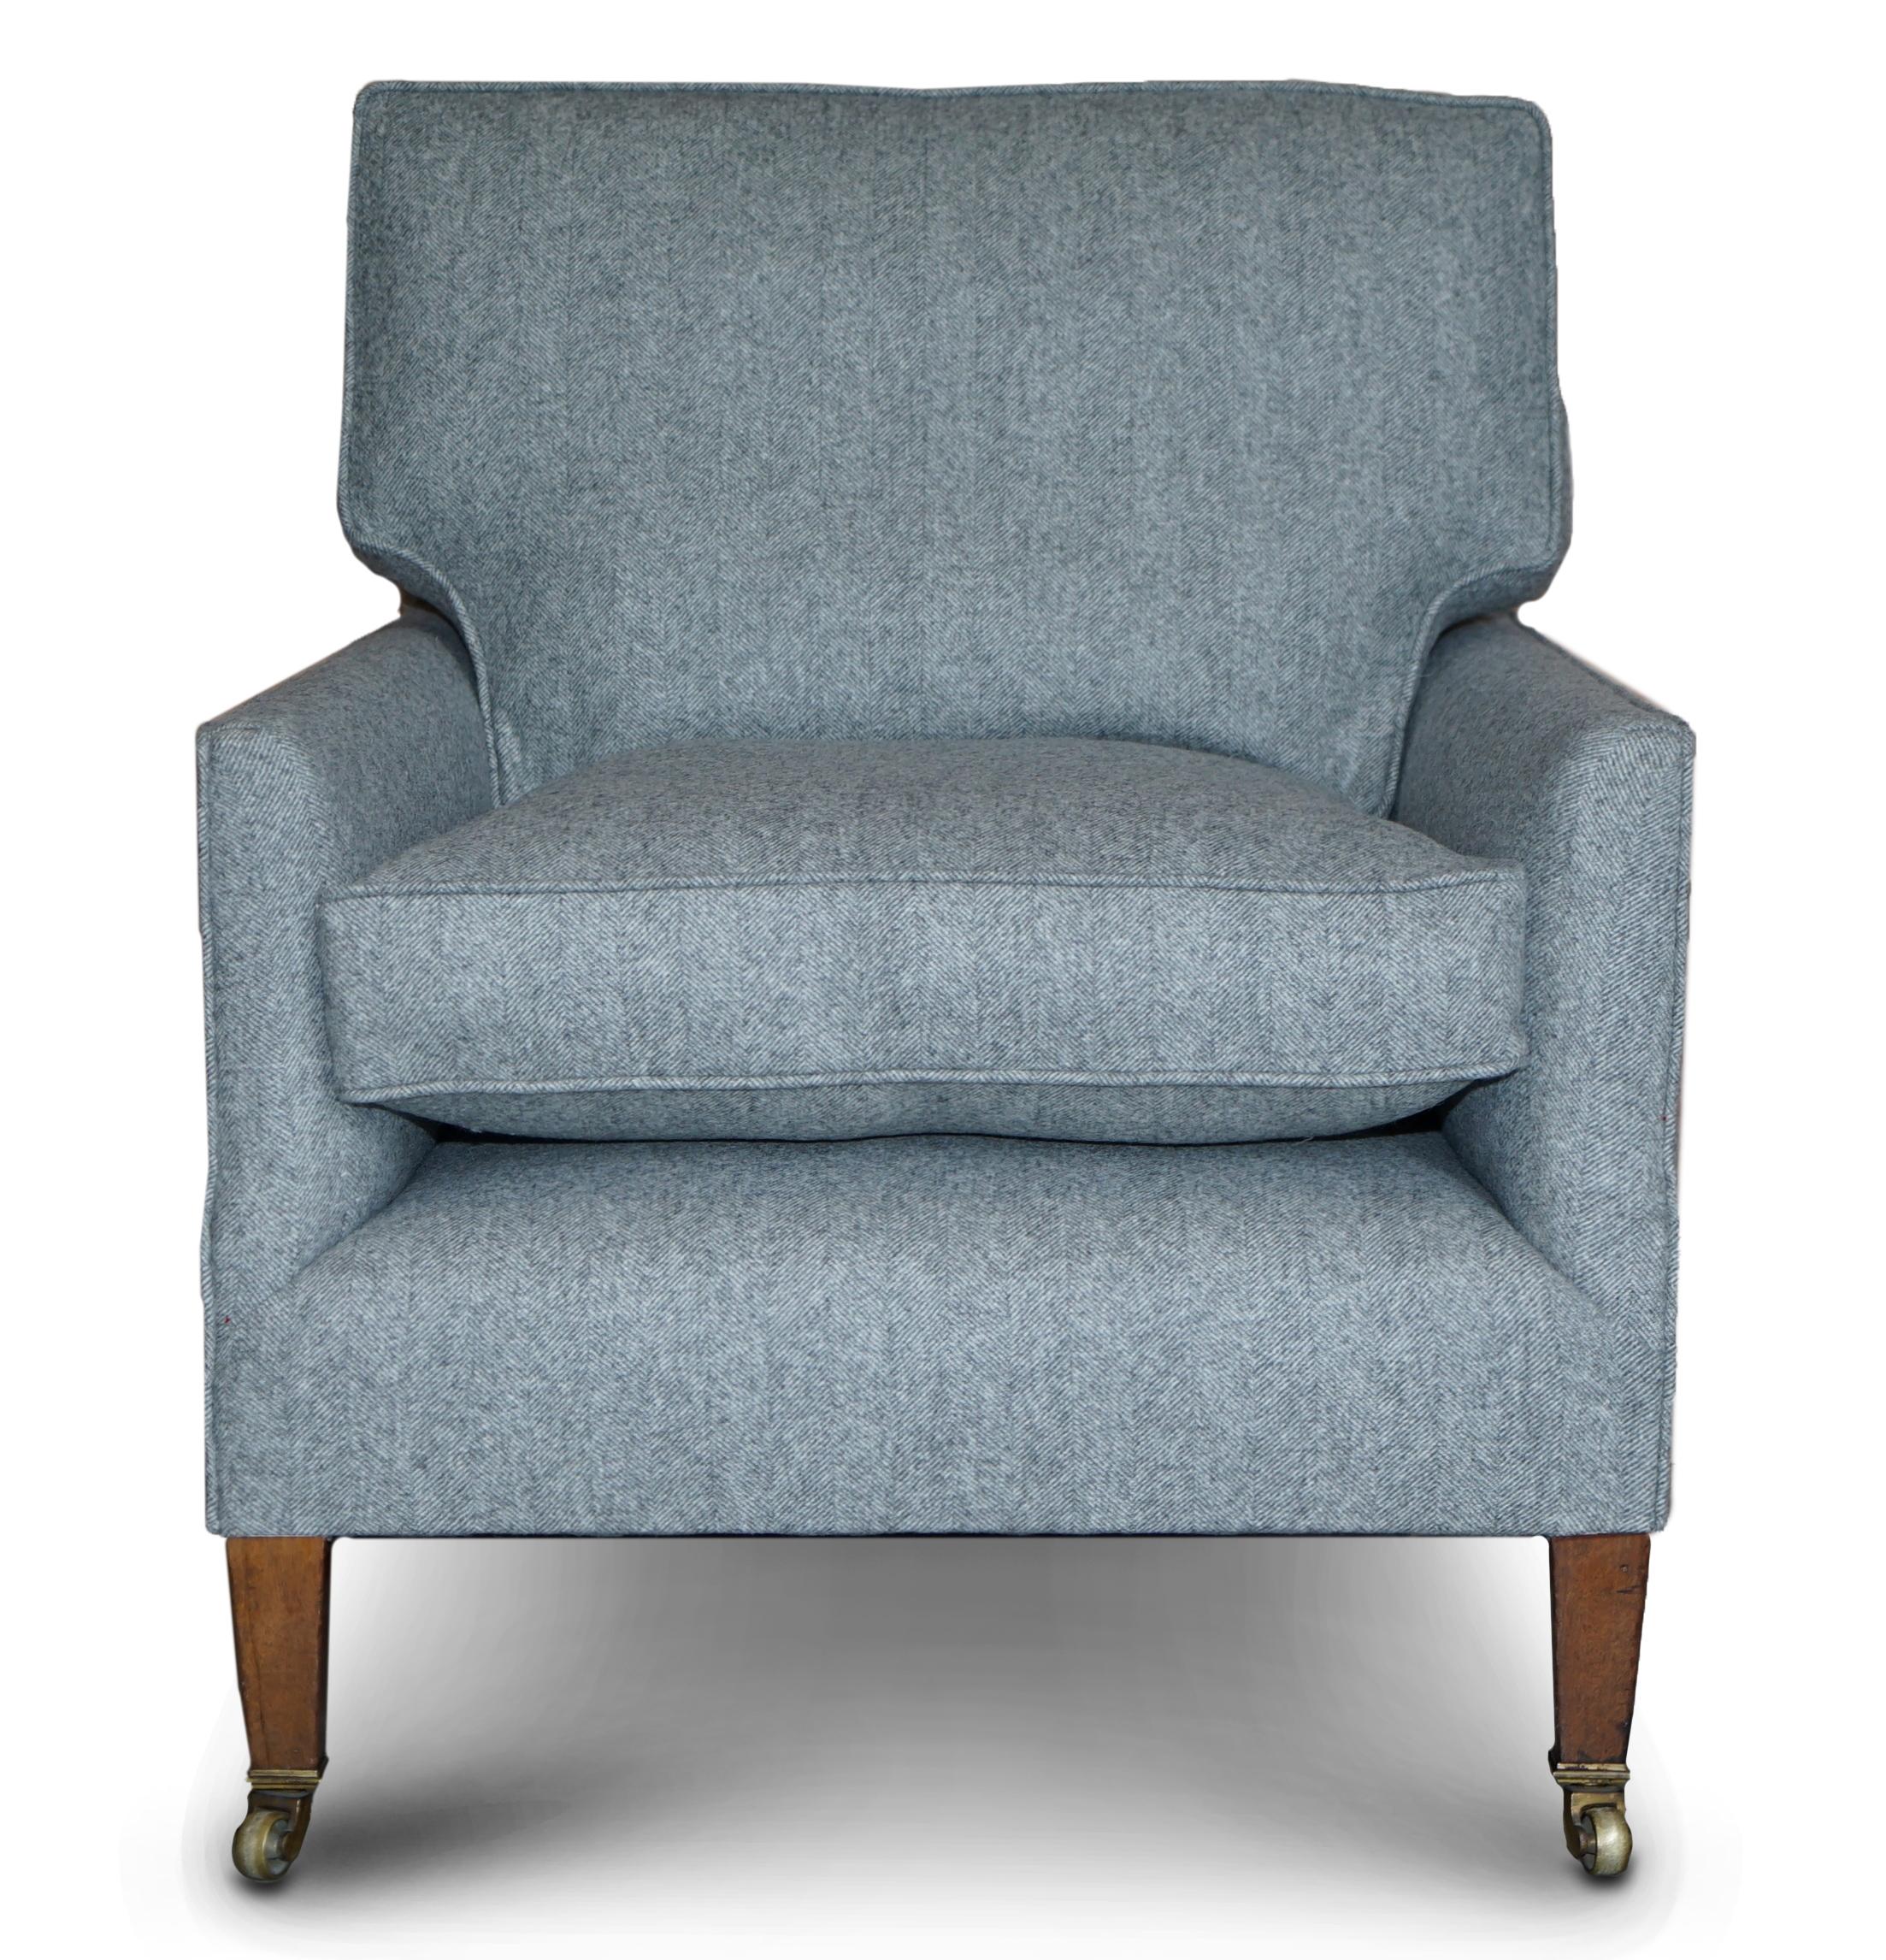 Hand-Crafted Pair of Howard & Son's Fully Stamped, Restored Herringbone Upholstered Armchairs